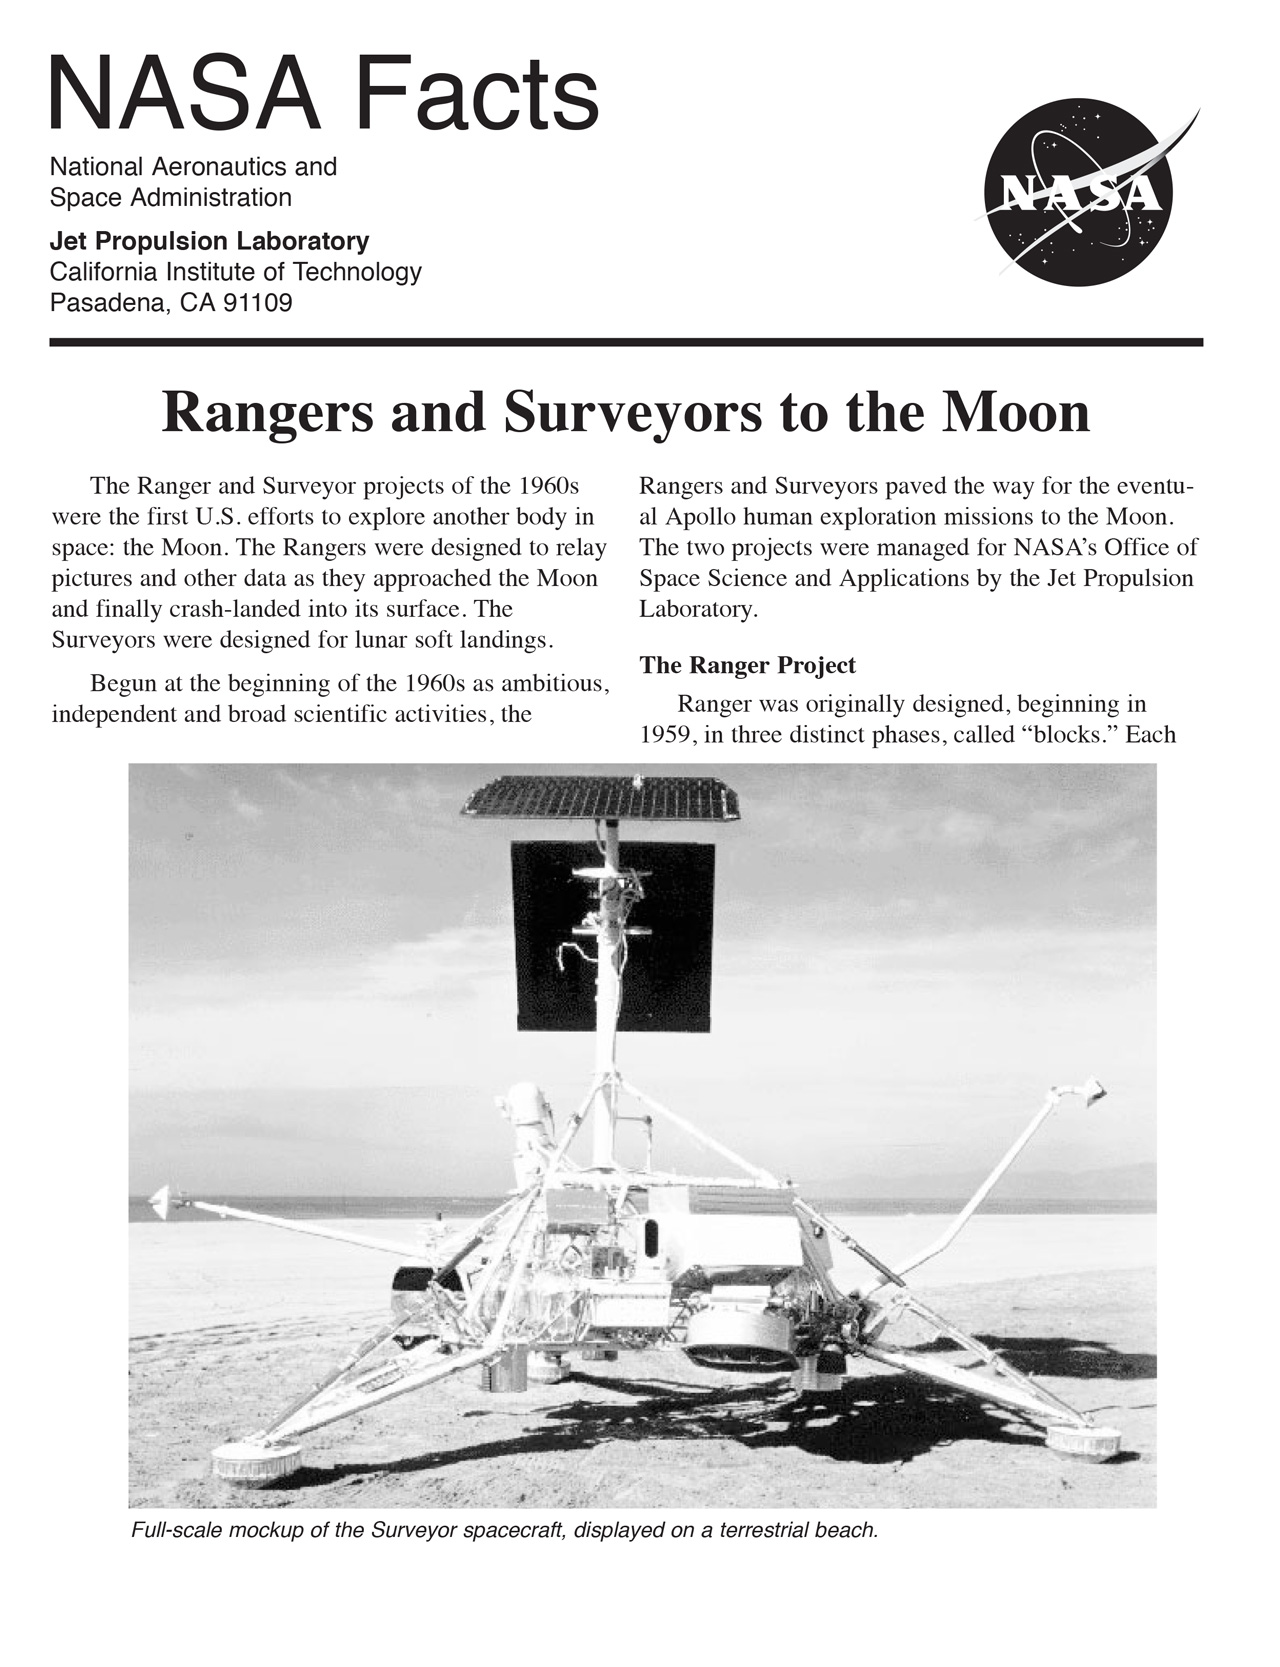 Fact sheet about two 1960s Moon mission programs.